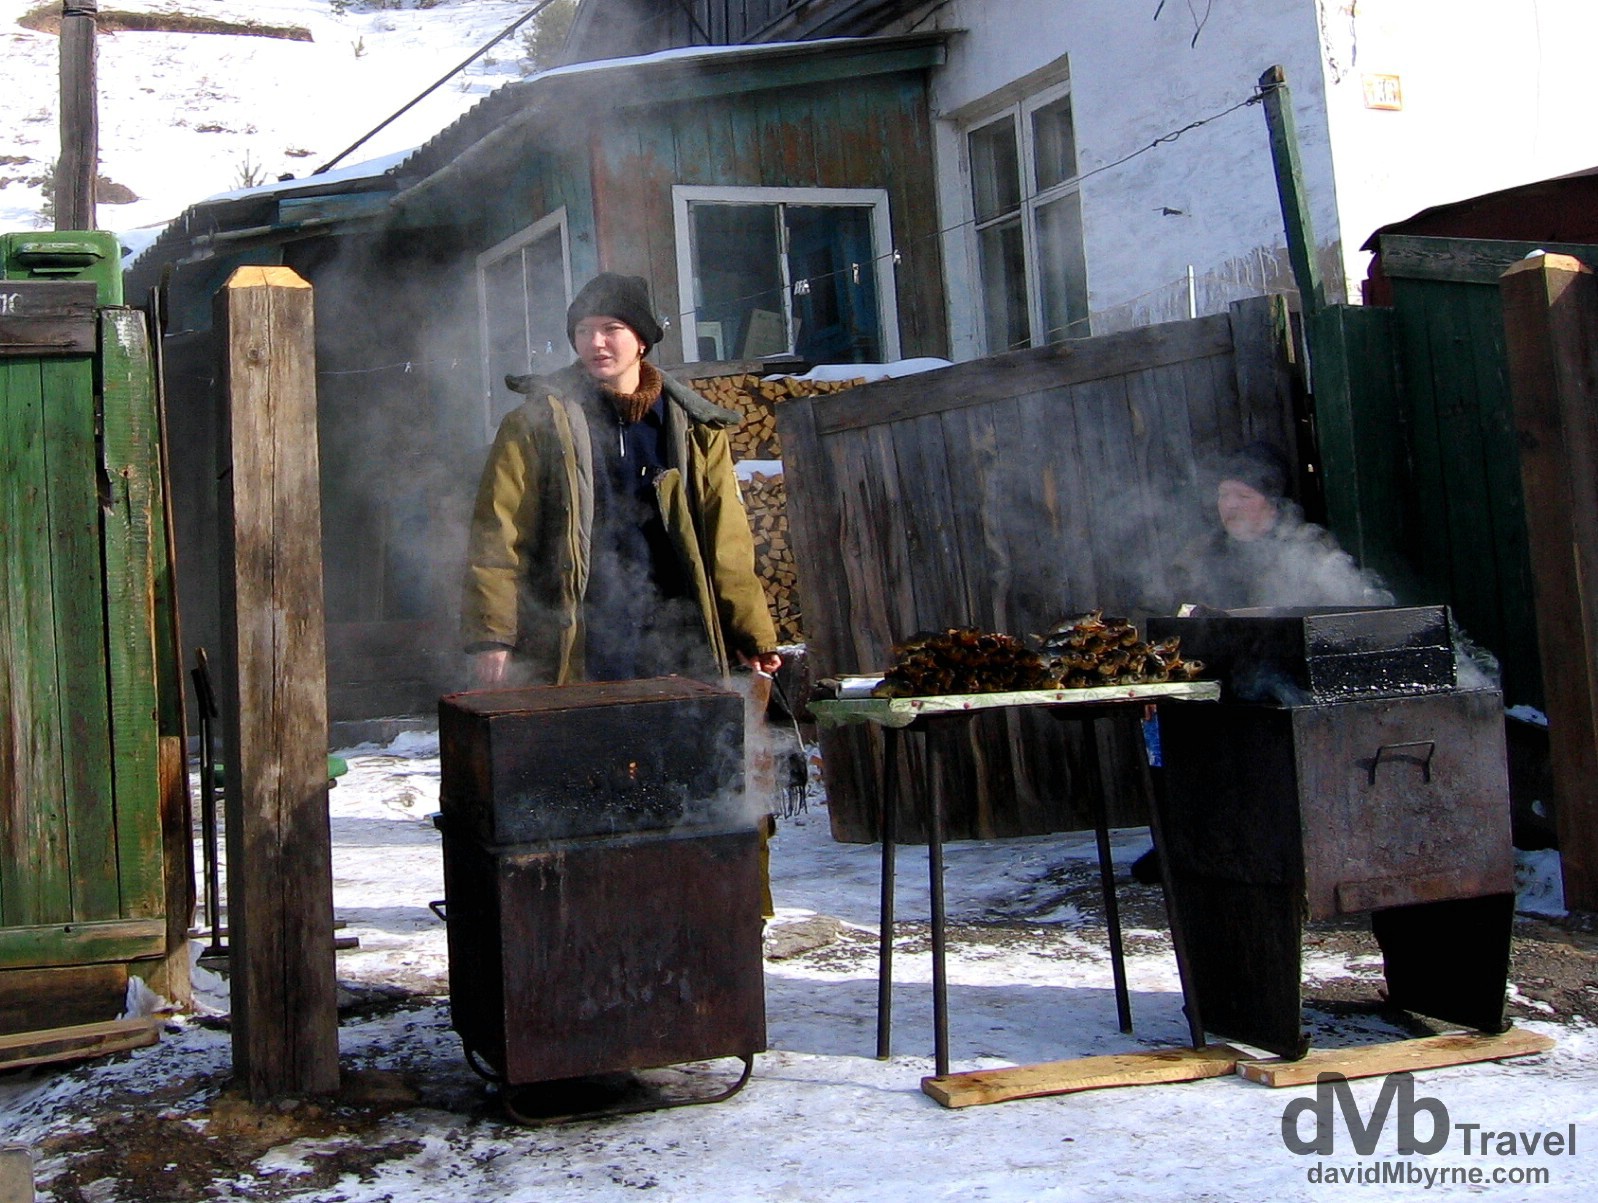 Omul sellers in the village of Listvyanka on the shores of Lake Baikal in Siberian Russia. February 18, 2006. 